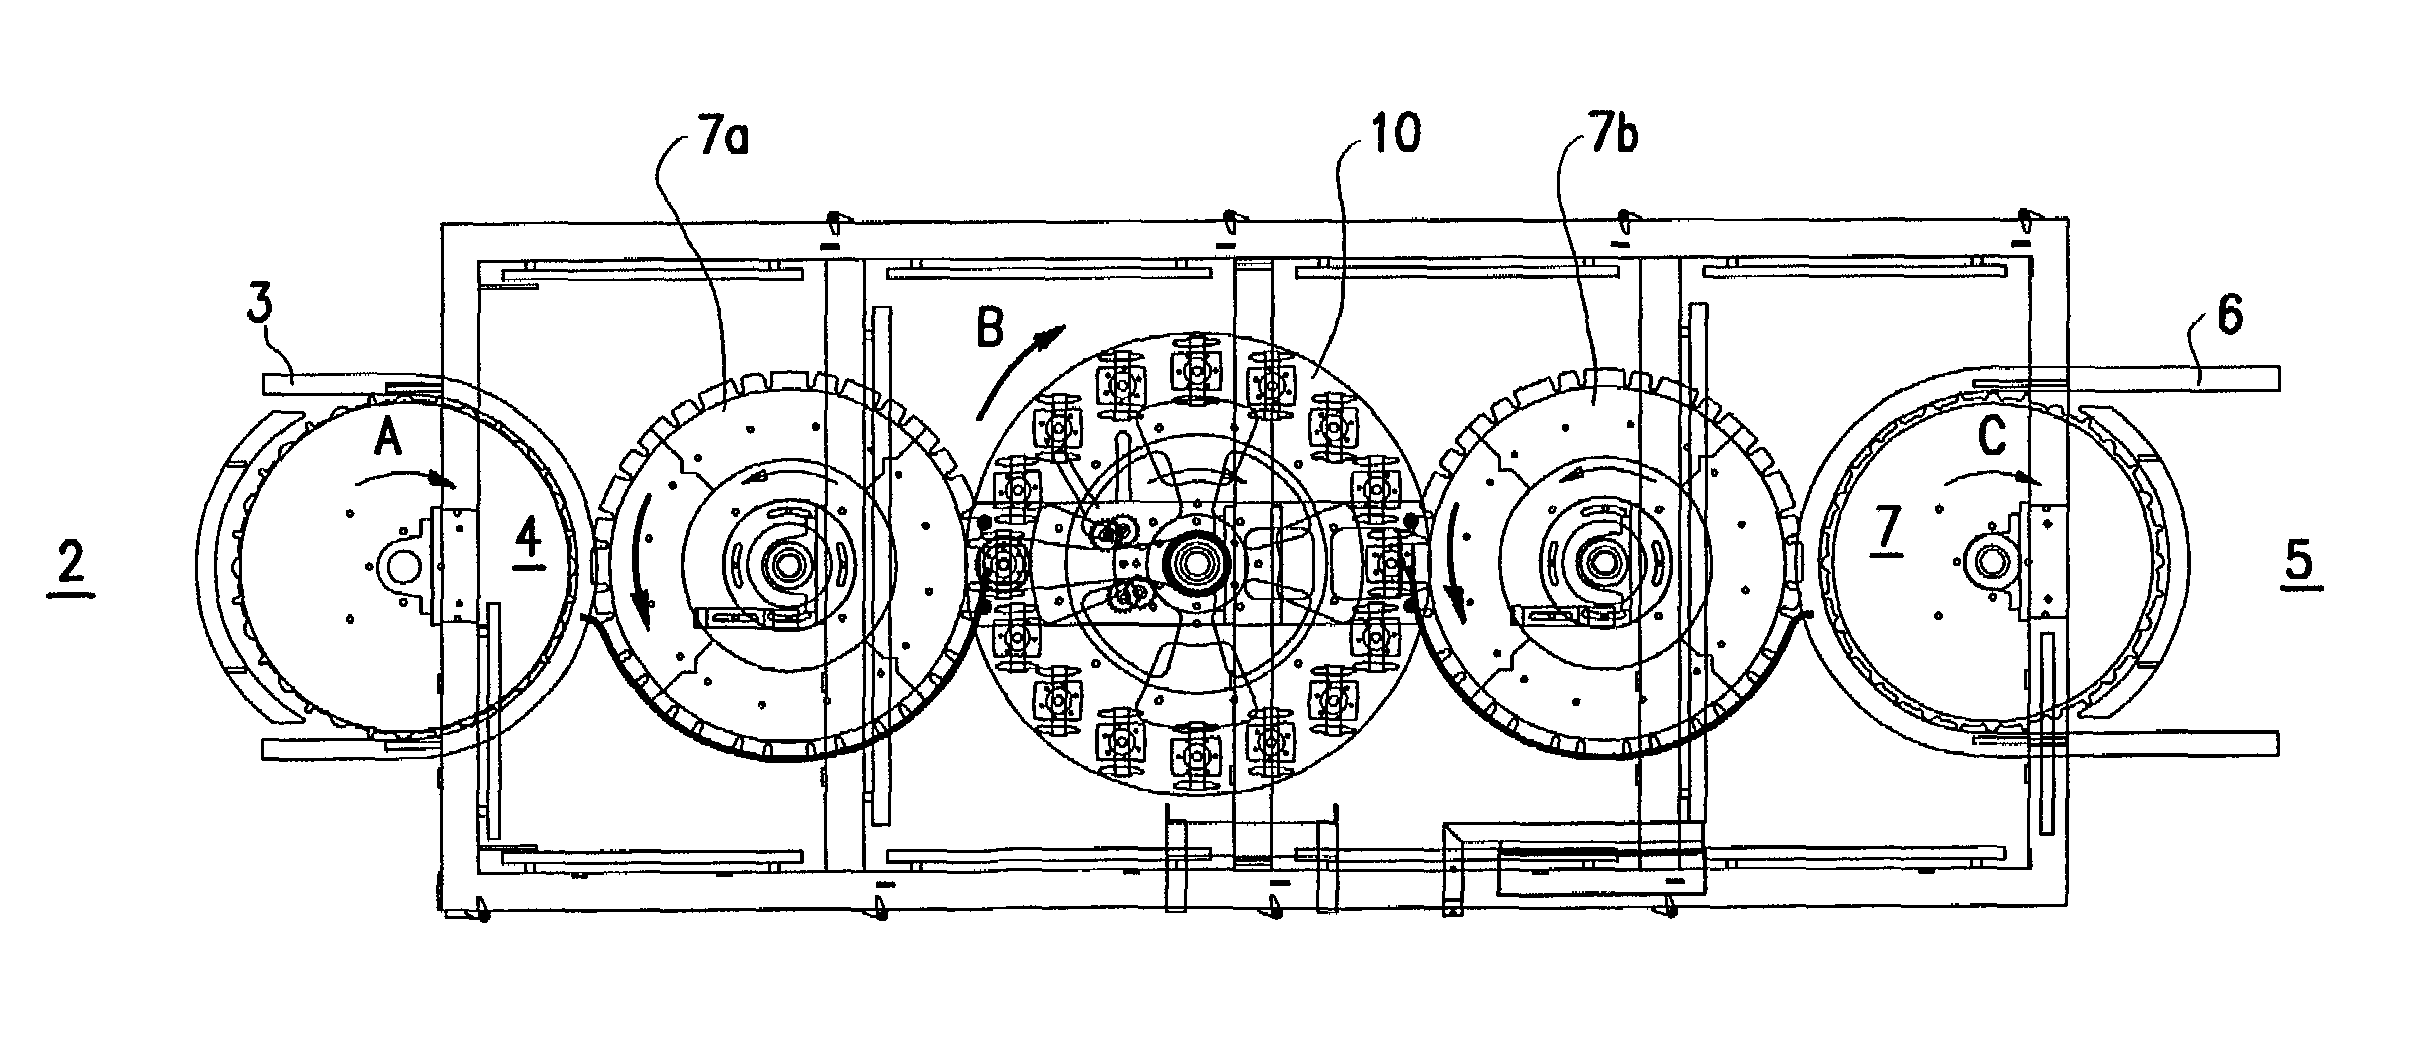 Apparatus for transferring poultry carcasses